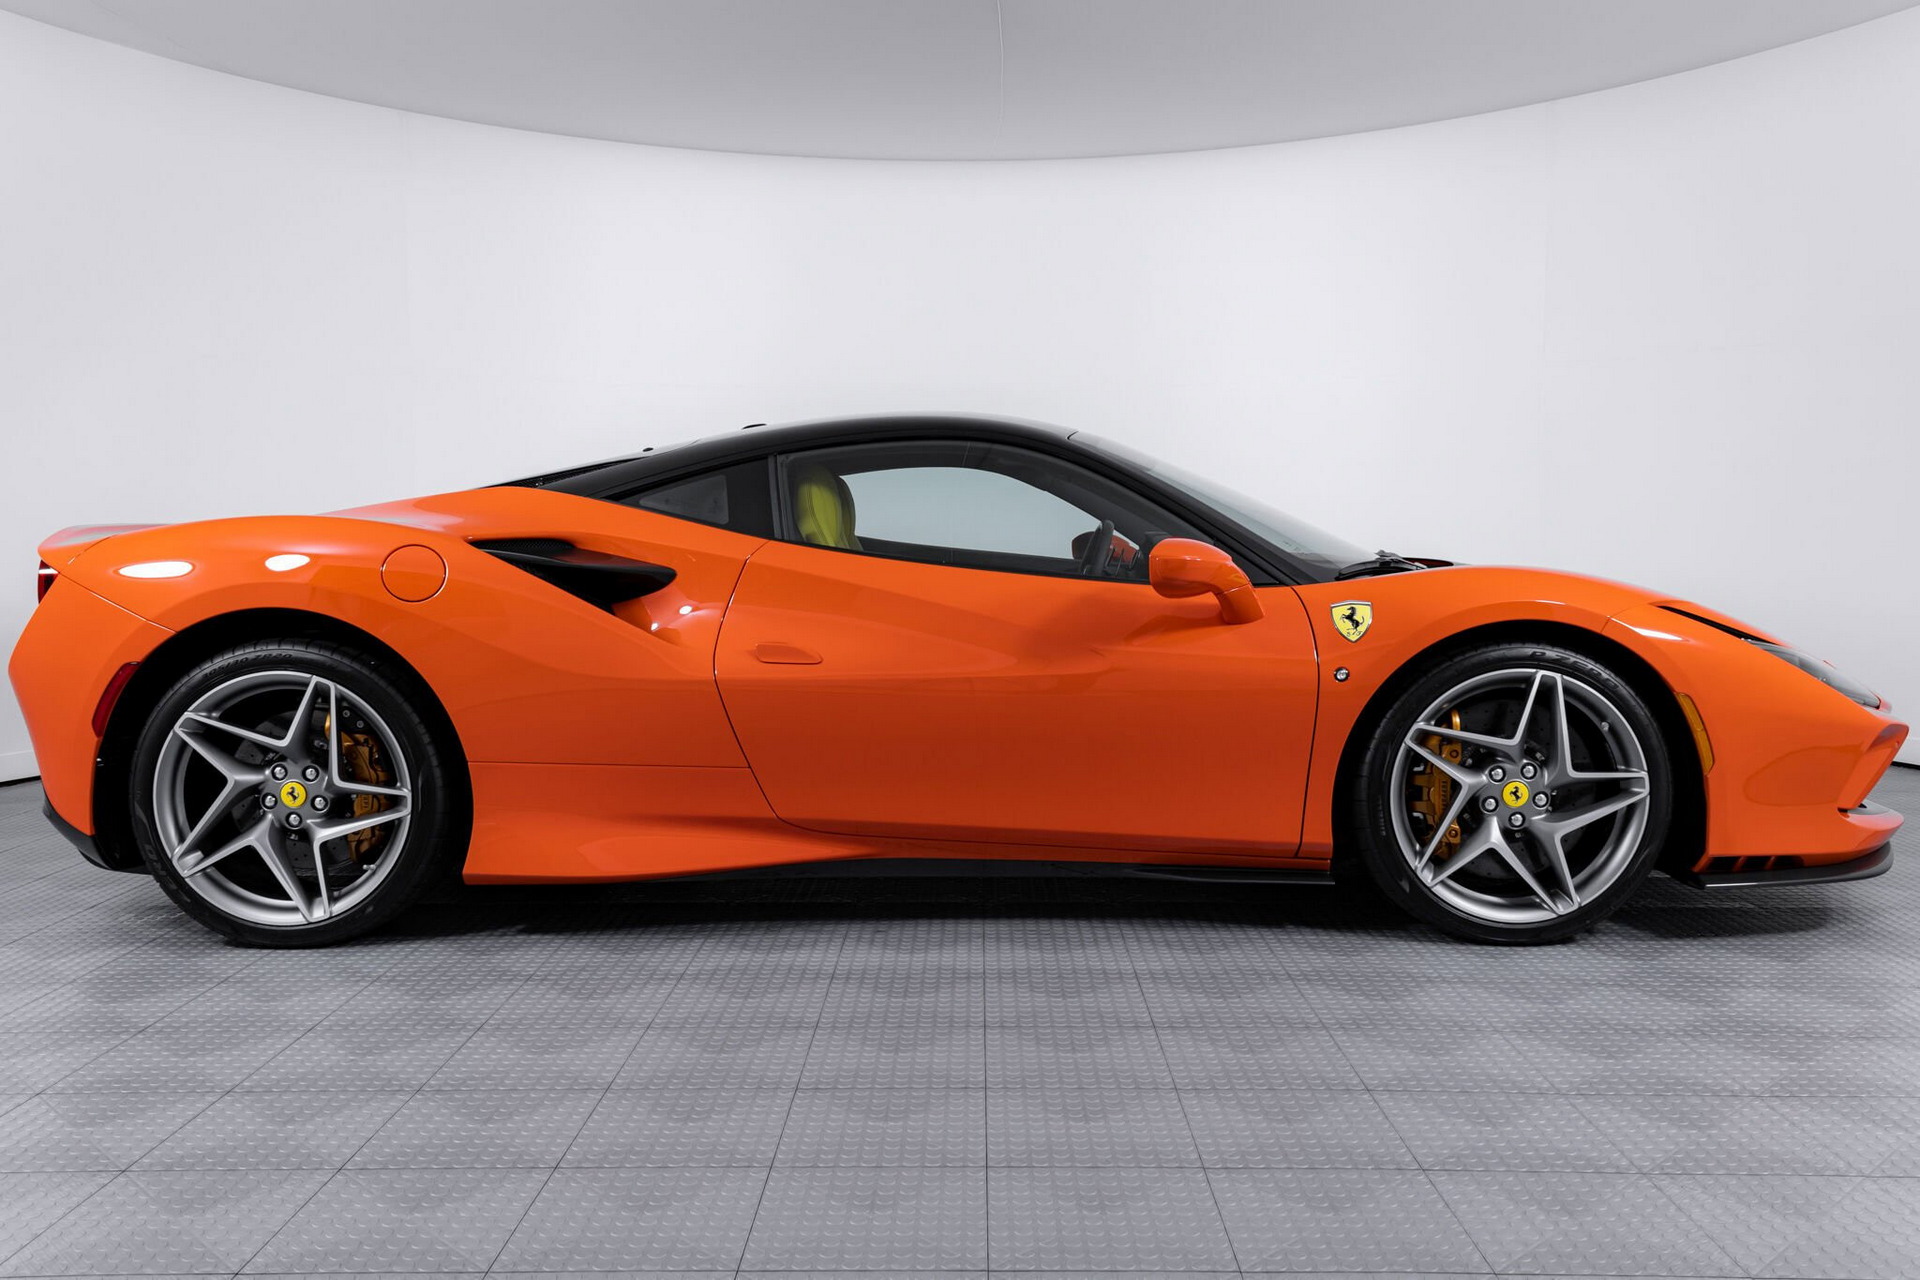 The orange Ferrari F8 Tributo with blue and yellow interior proves that money does not always buy the taste.